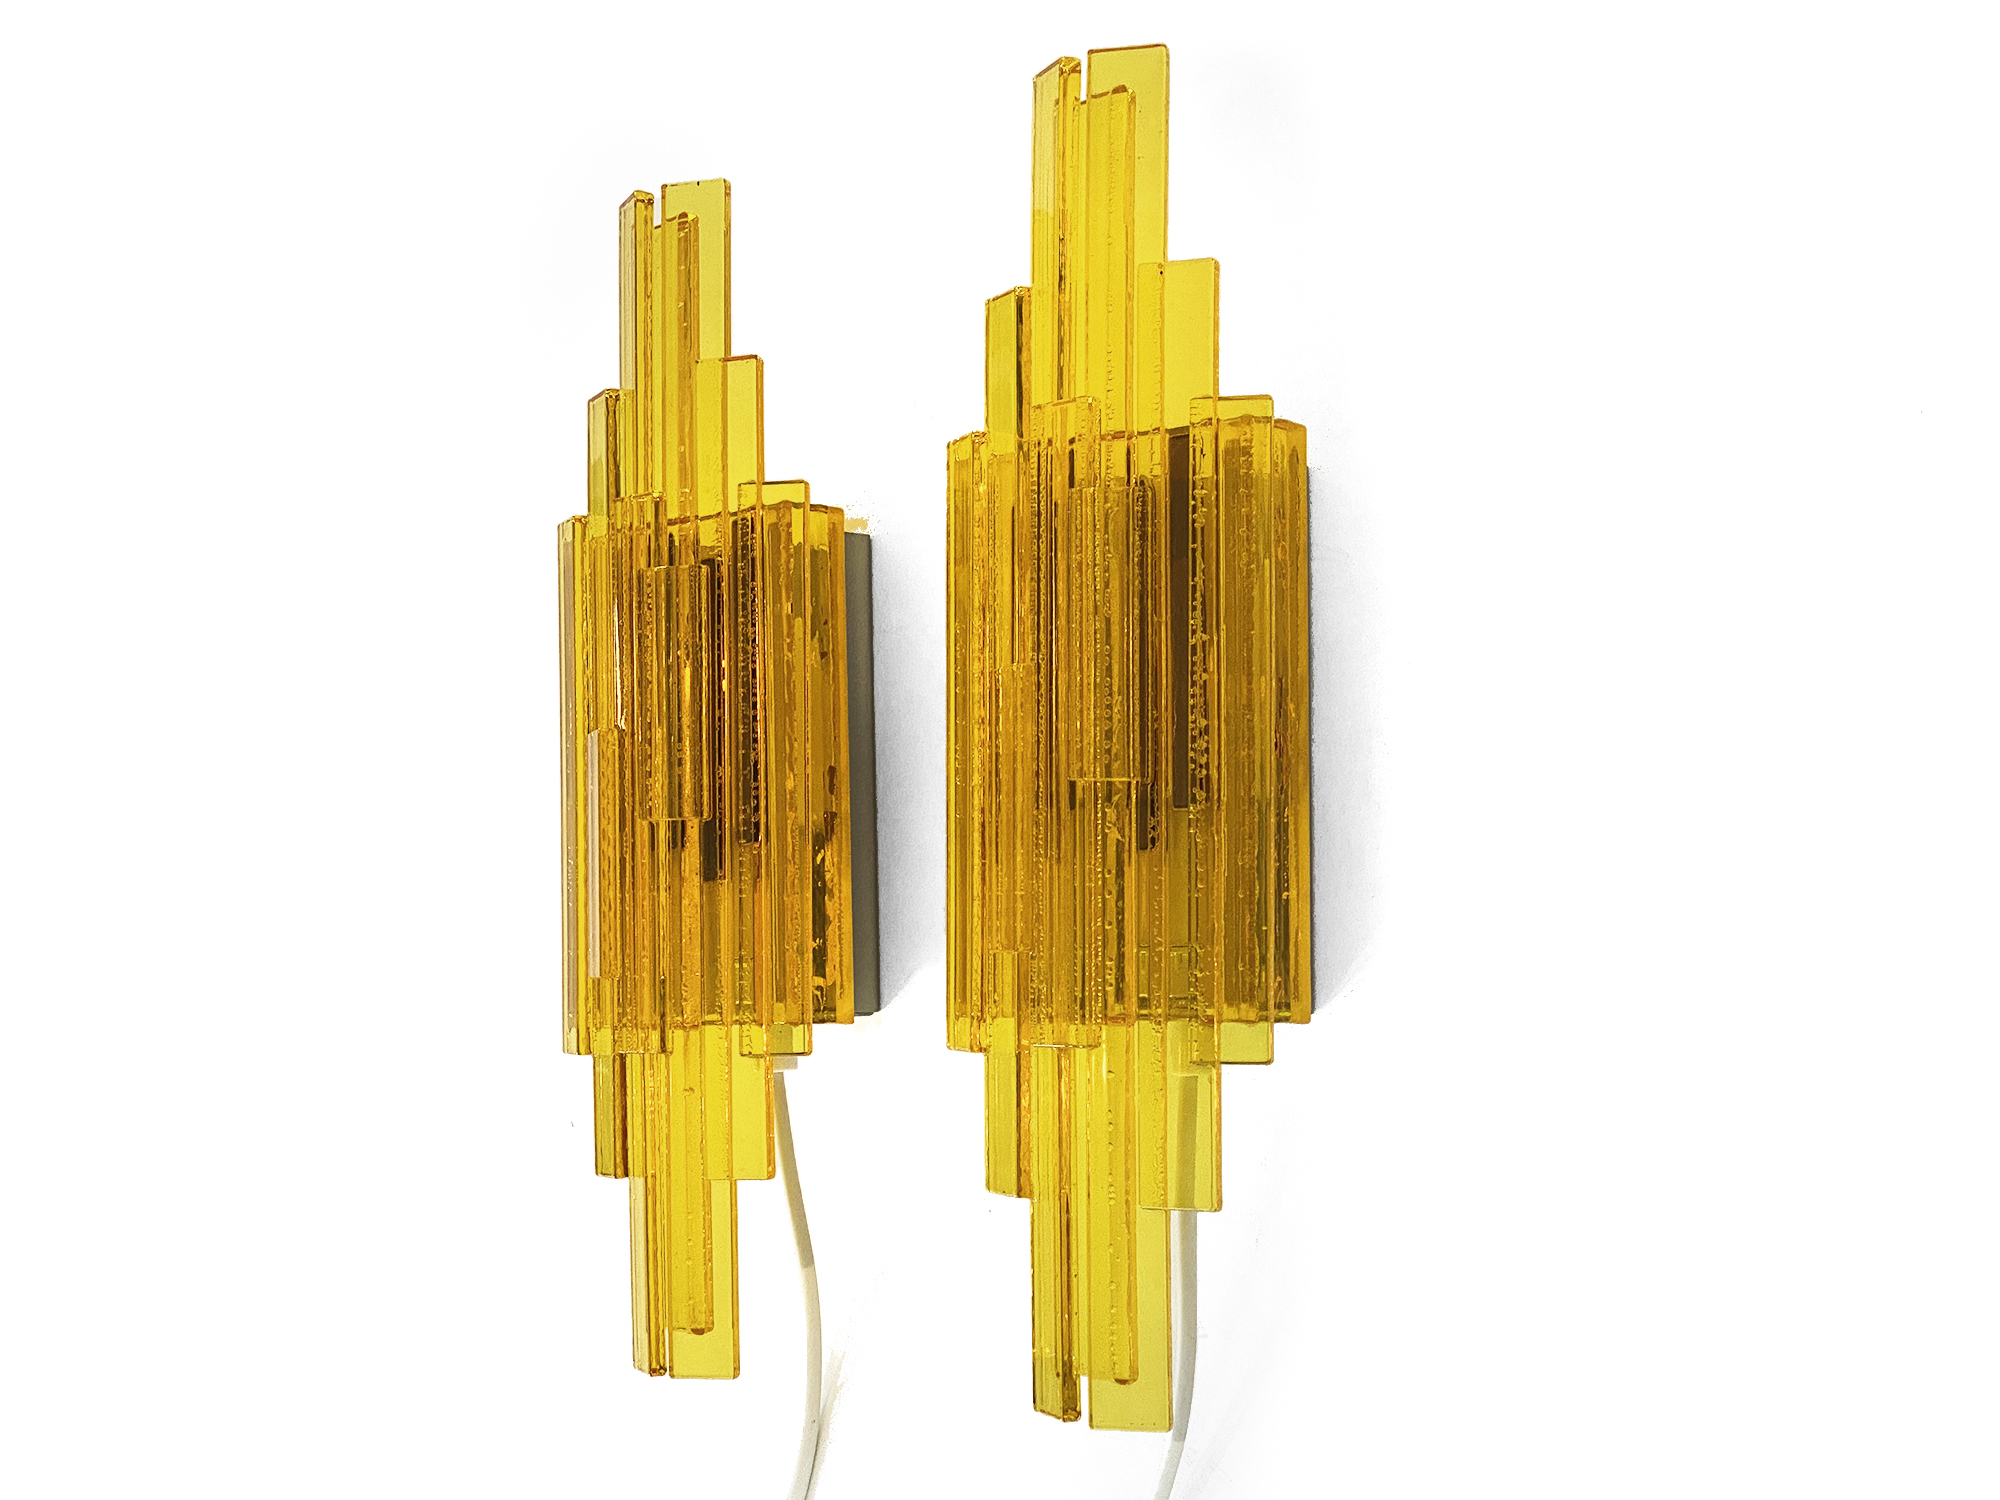 Pair of acrylic wall lights/sconces by Claus Bolby for CeBo industri. Denmark 1960s